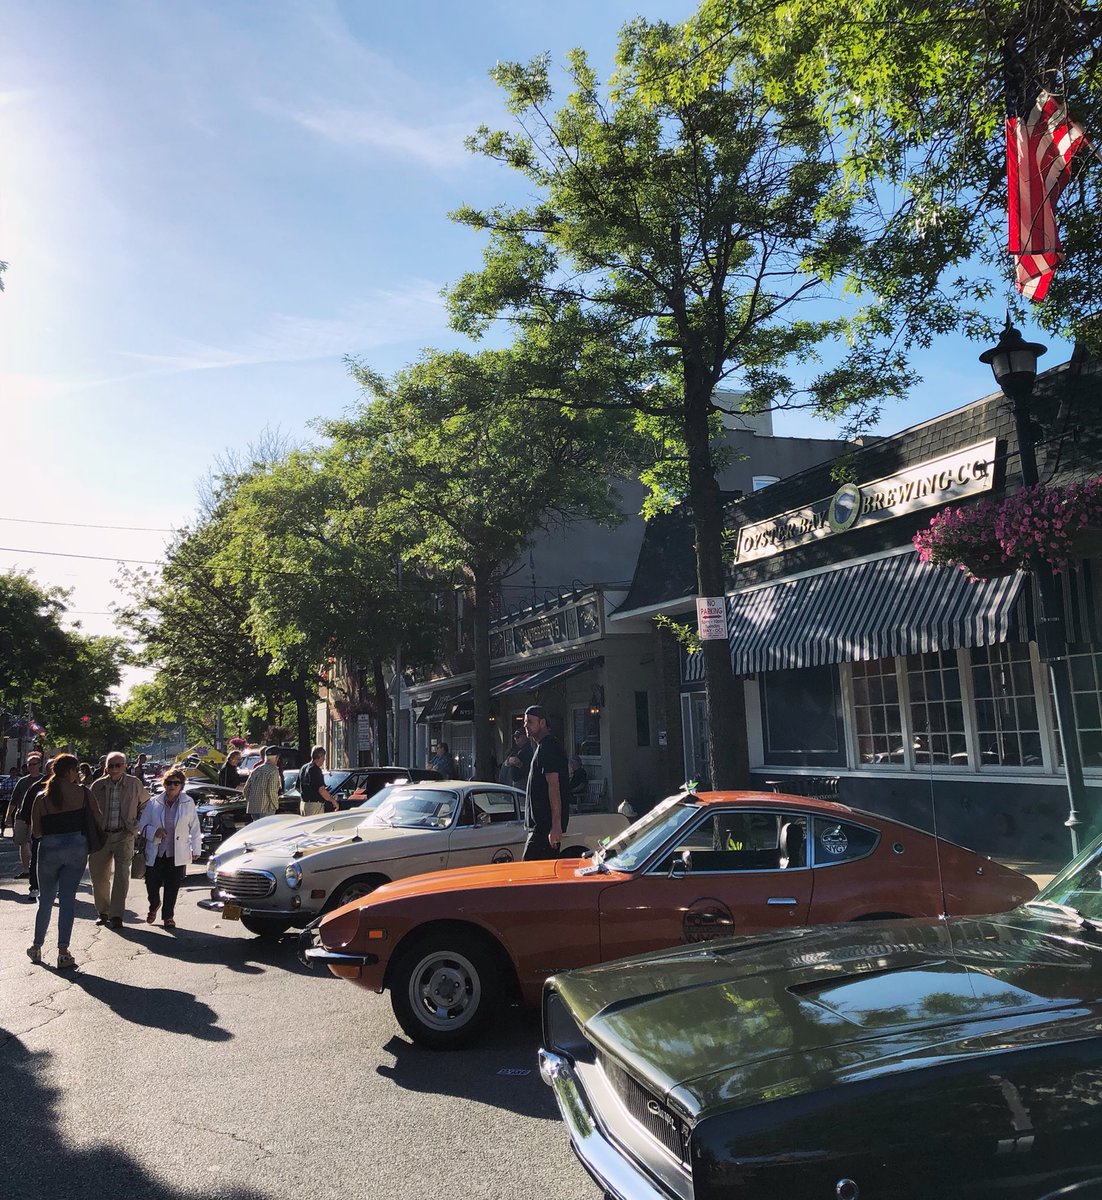 CRUISE NIGHT and it’s gorgeous out! Cruise with us and find the car show down Audrey Avenue, right in front of the brewery🏎🍻🚘 *NEW* Oyster Bay American Lager on tap #oysterbaybrewingco #oysterbay #cruisenight #carshow #lager #longisland #lievents #familyfun